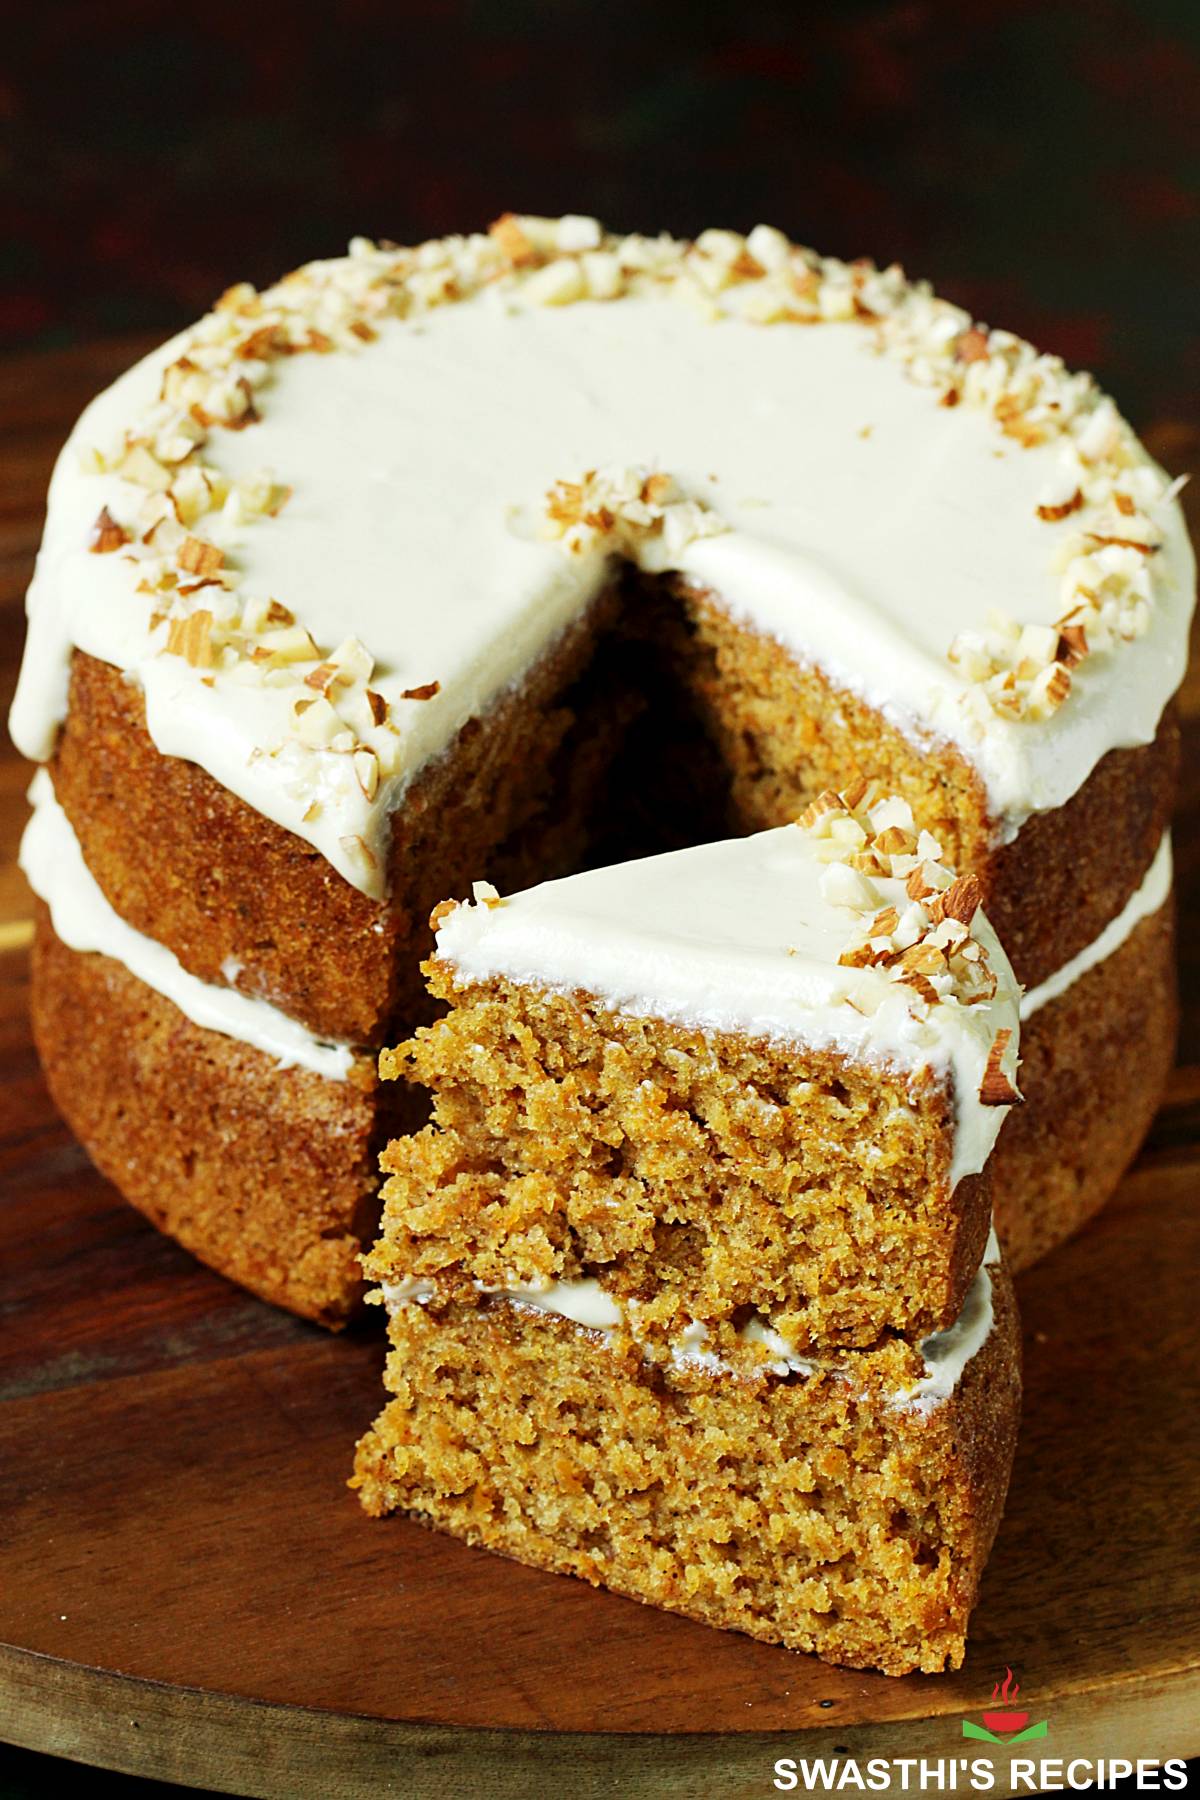 Whole Wheat Carrot Cake with Skinny Cream Cheese Frosting | Easy Wholesome